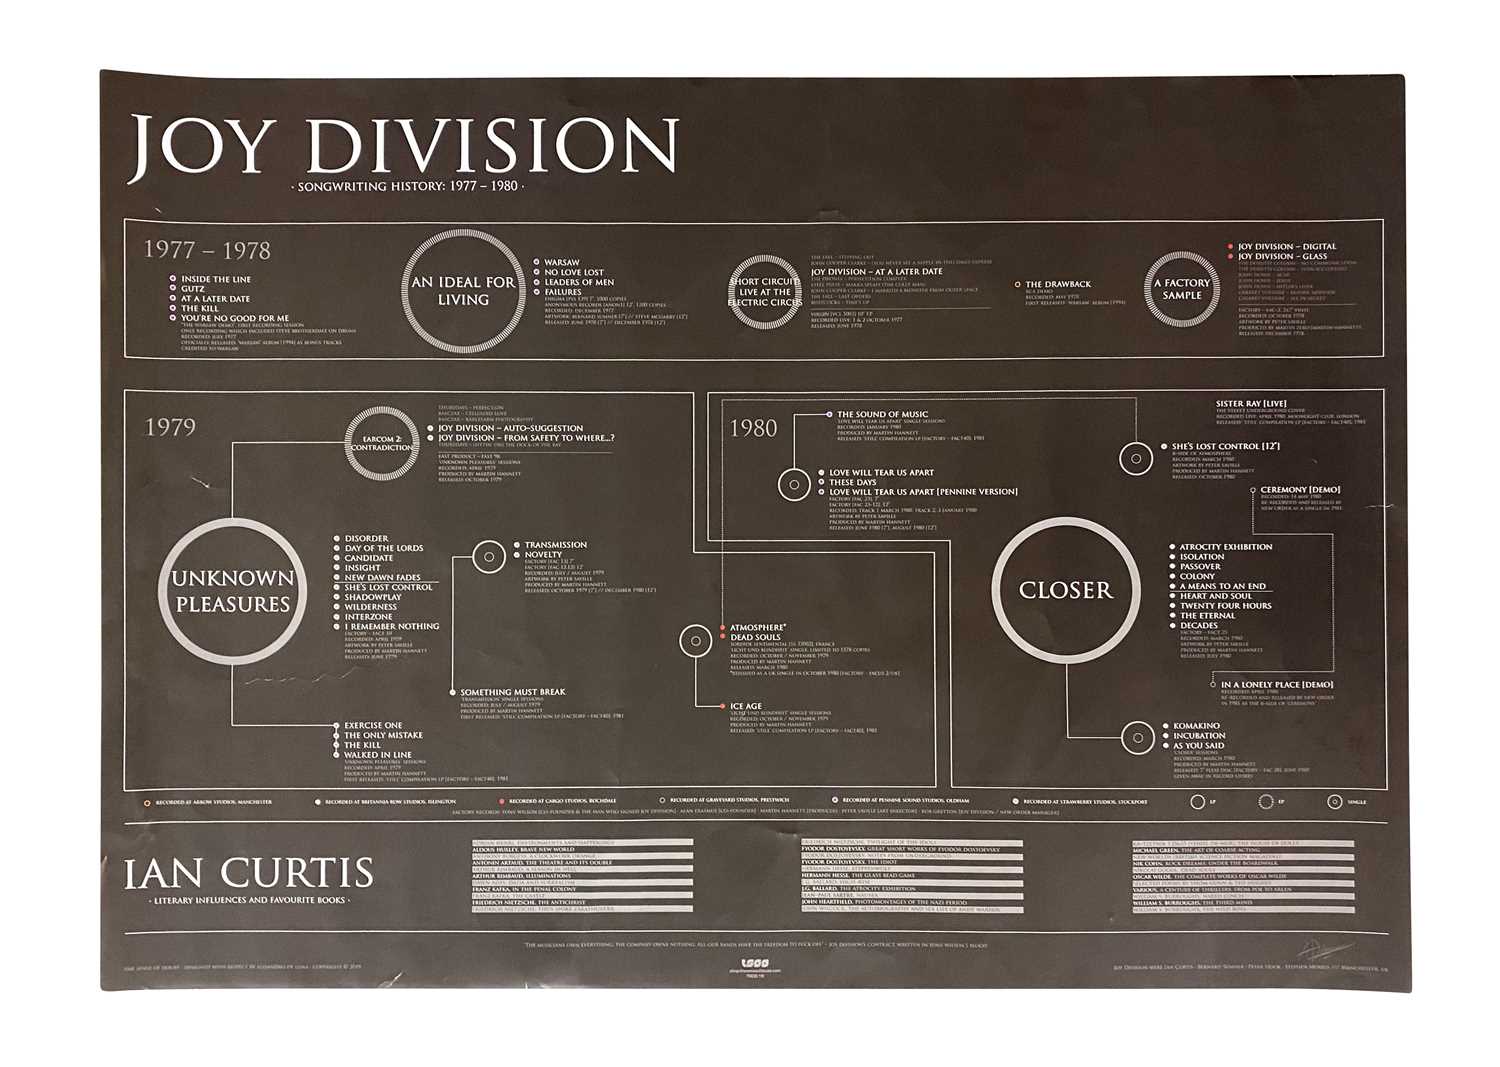 Lot 160 - JOY DIVISION SONGWRITING HISTORY POSTER 1977-1980 POSTER